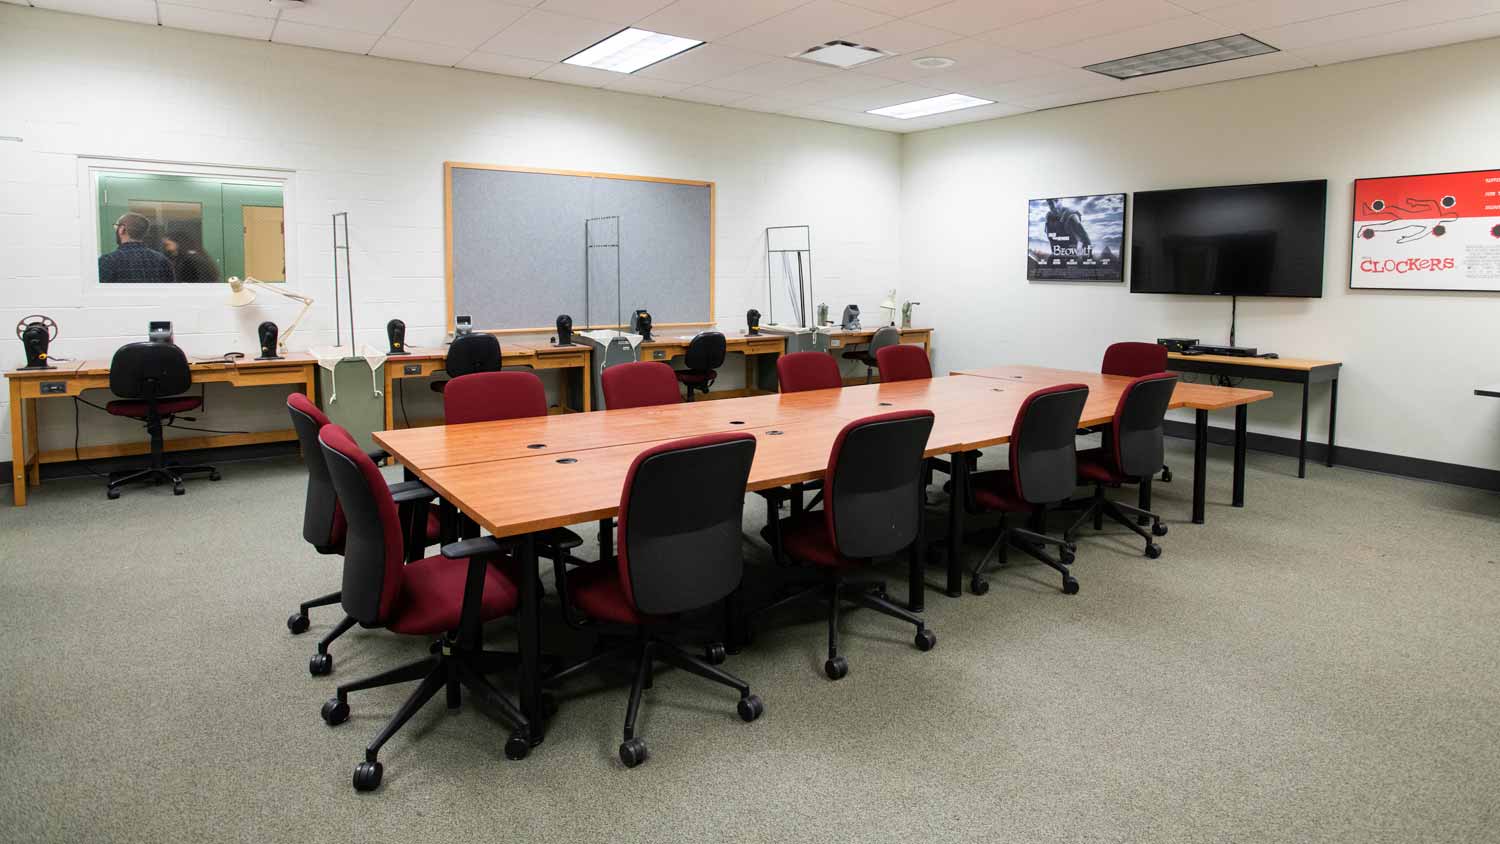 Seminar room with a large conference table facing a large TV screen